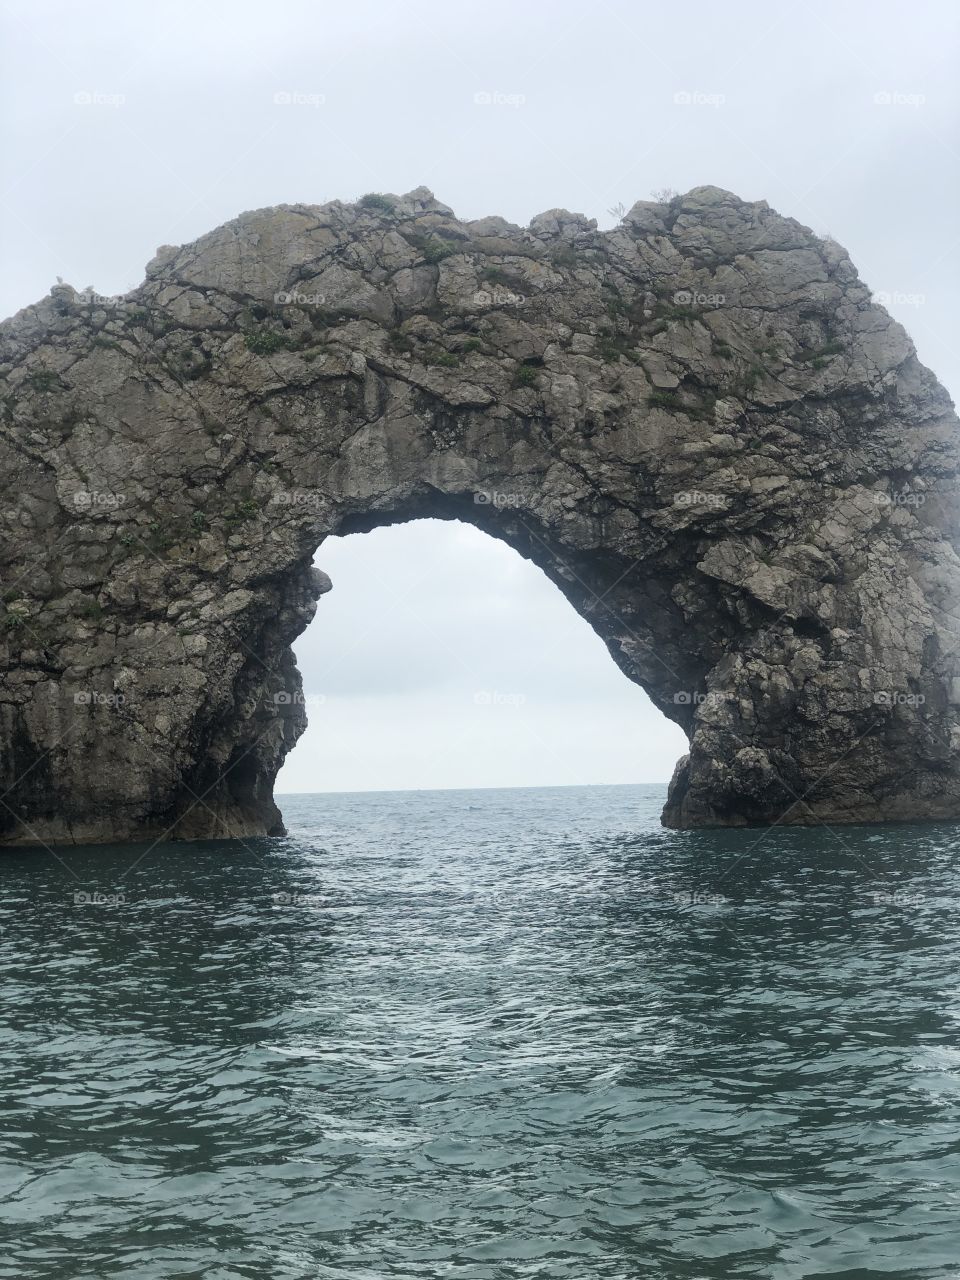 This is took while in durdle door in the uk. very beautiful arch with nice calm cold sea